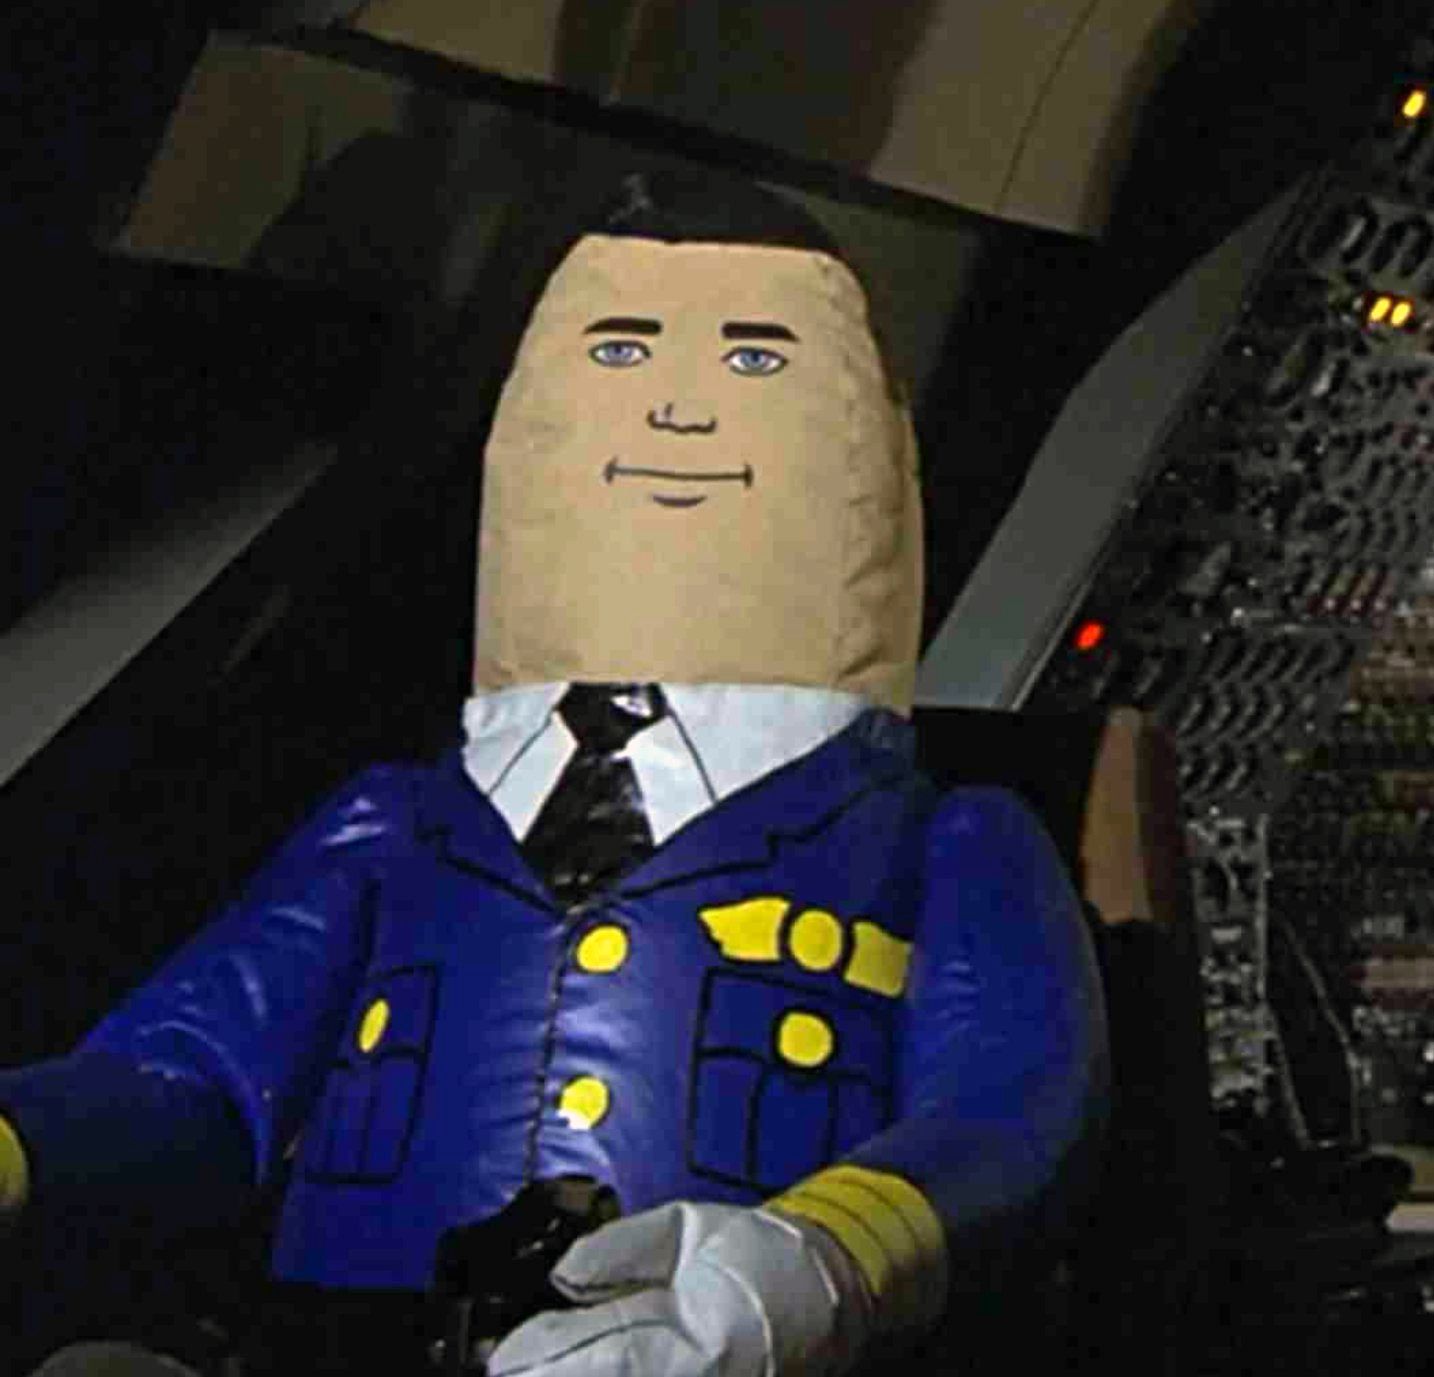 Otto the autopilot from 'Airplane' (1980)